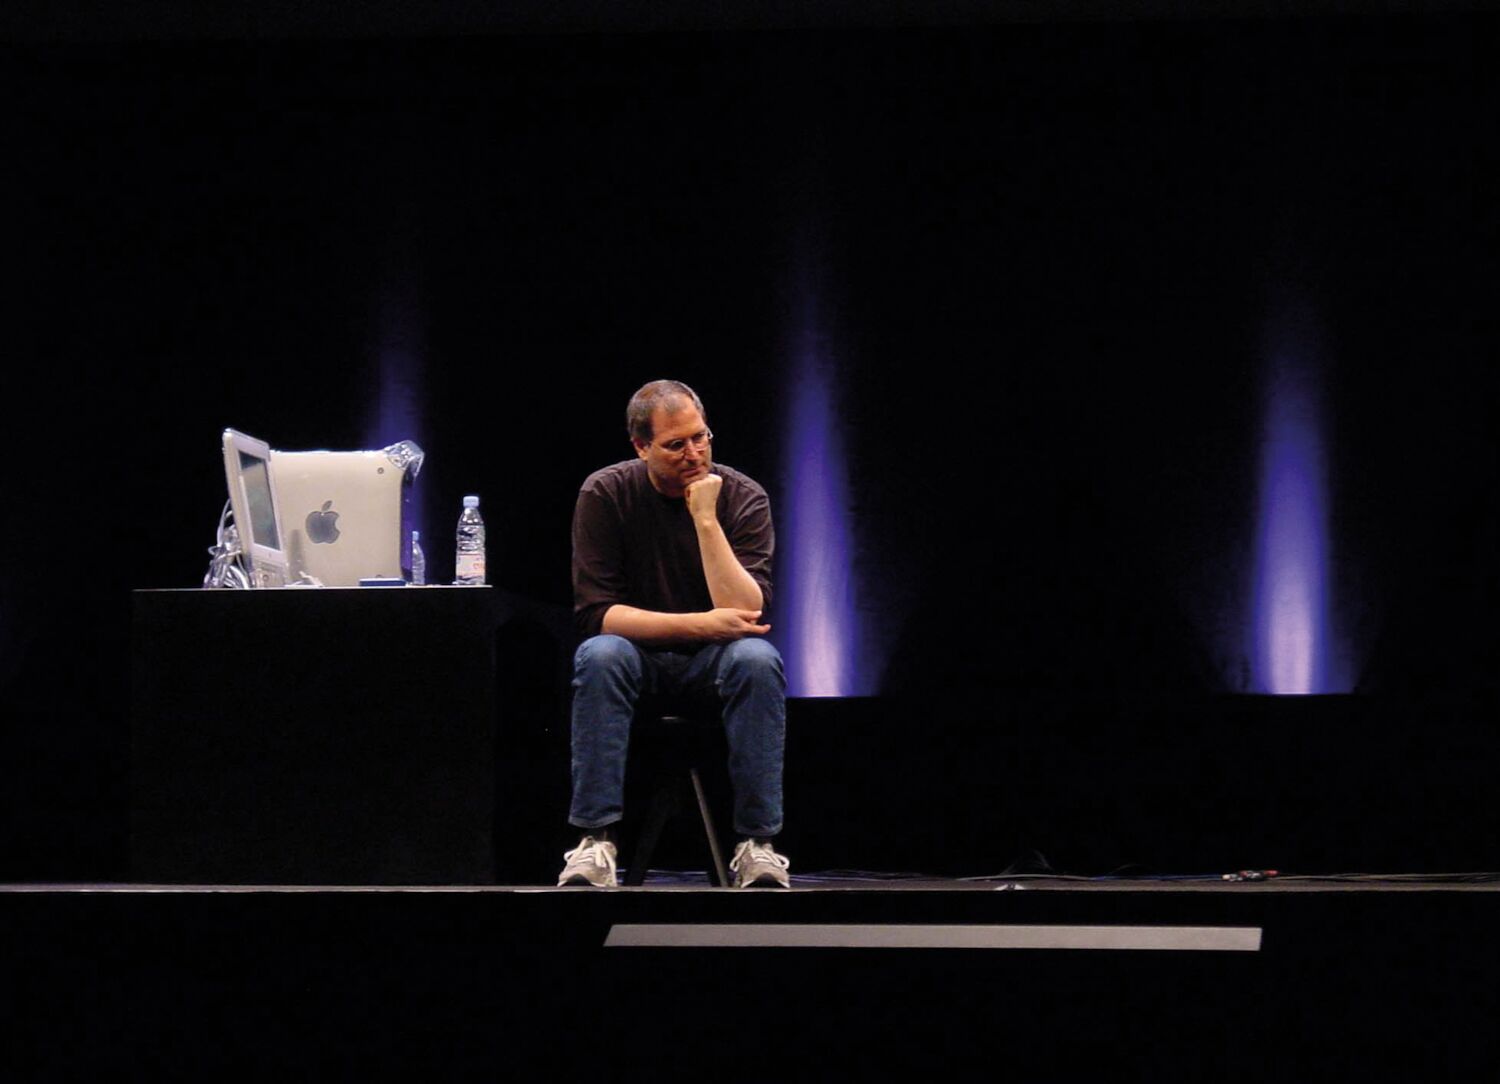 Steve takes a break during stage rehearsals for MacWorld. Sitting on a stool, he leans forward with his hand on his chin.